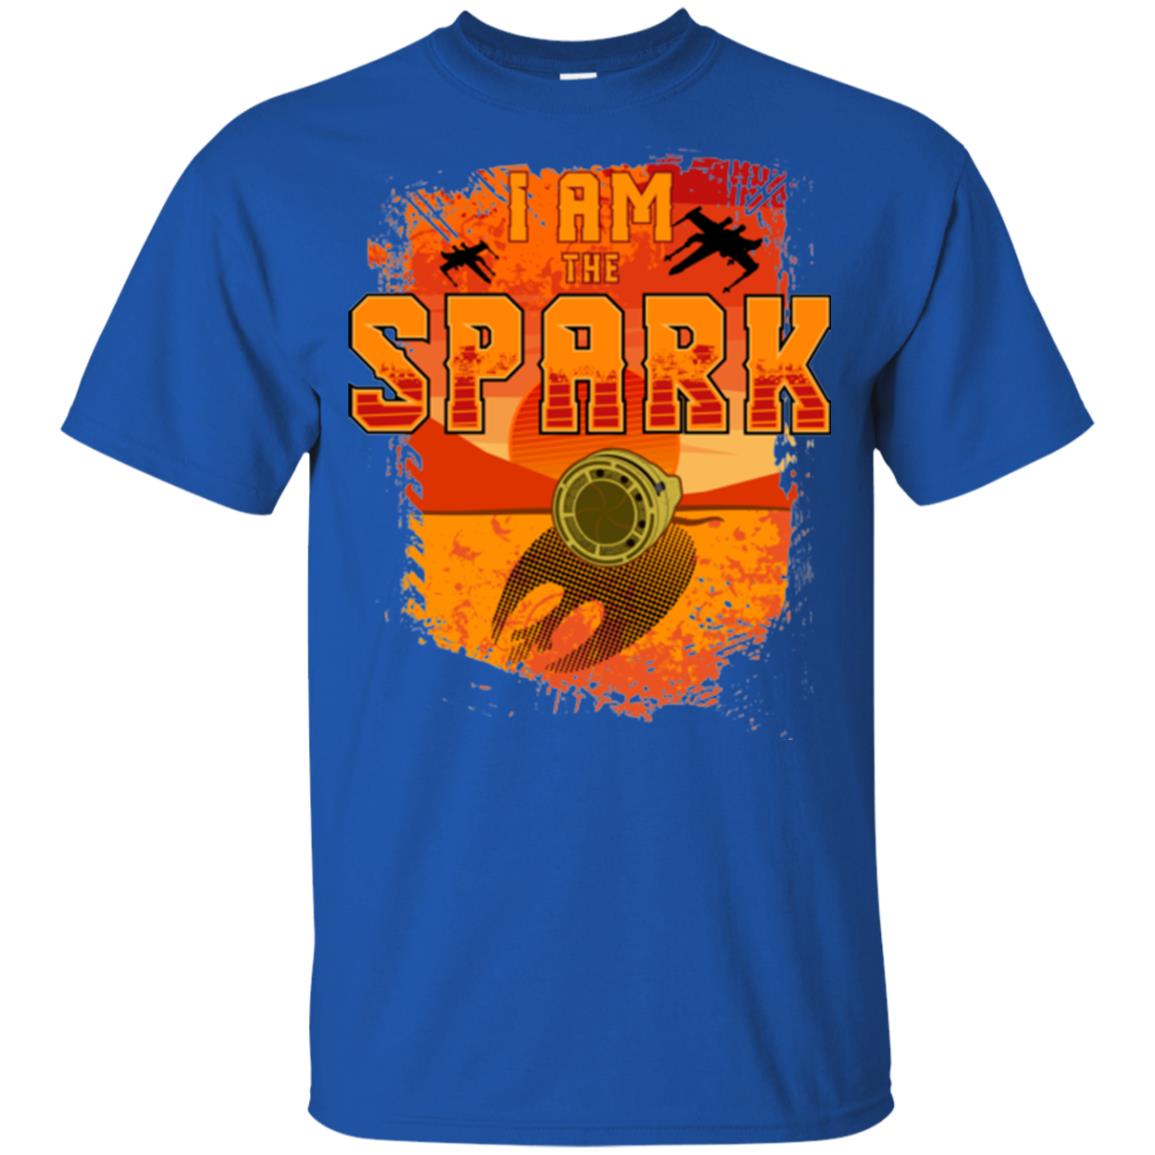 Youth  "I am the Spark" Rebellion  Graphic-Tee